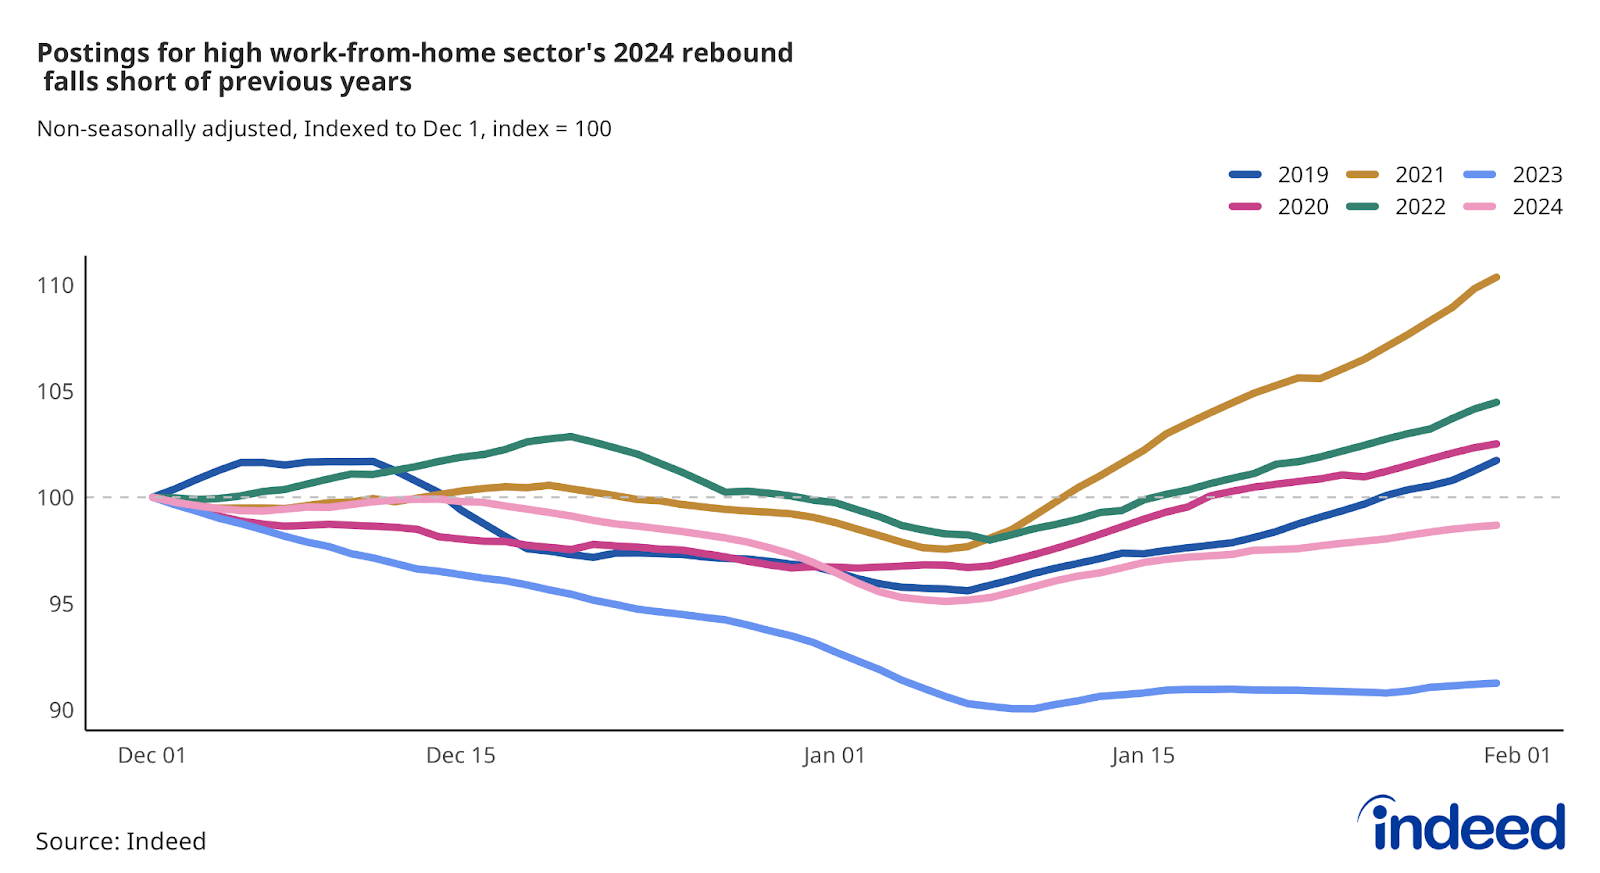 Line chart titled “Postings for high work-from-home sector’s 2024 rebound falls short of previous years.” With a vertical axis ranging from 90 to 110, Indeed tracked postings along a horizontal axis running from December to February, with different colored lines representing 2019, 2020, 2021, 2022, 2023, and 2024.